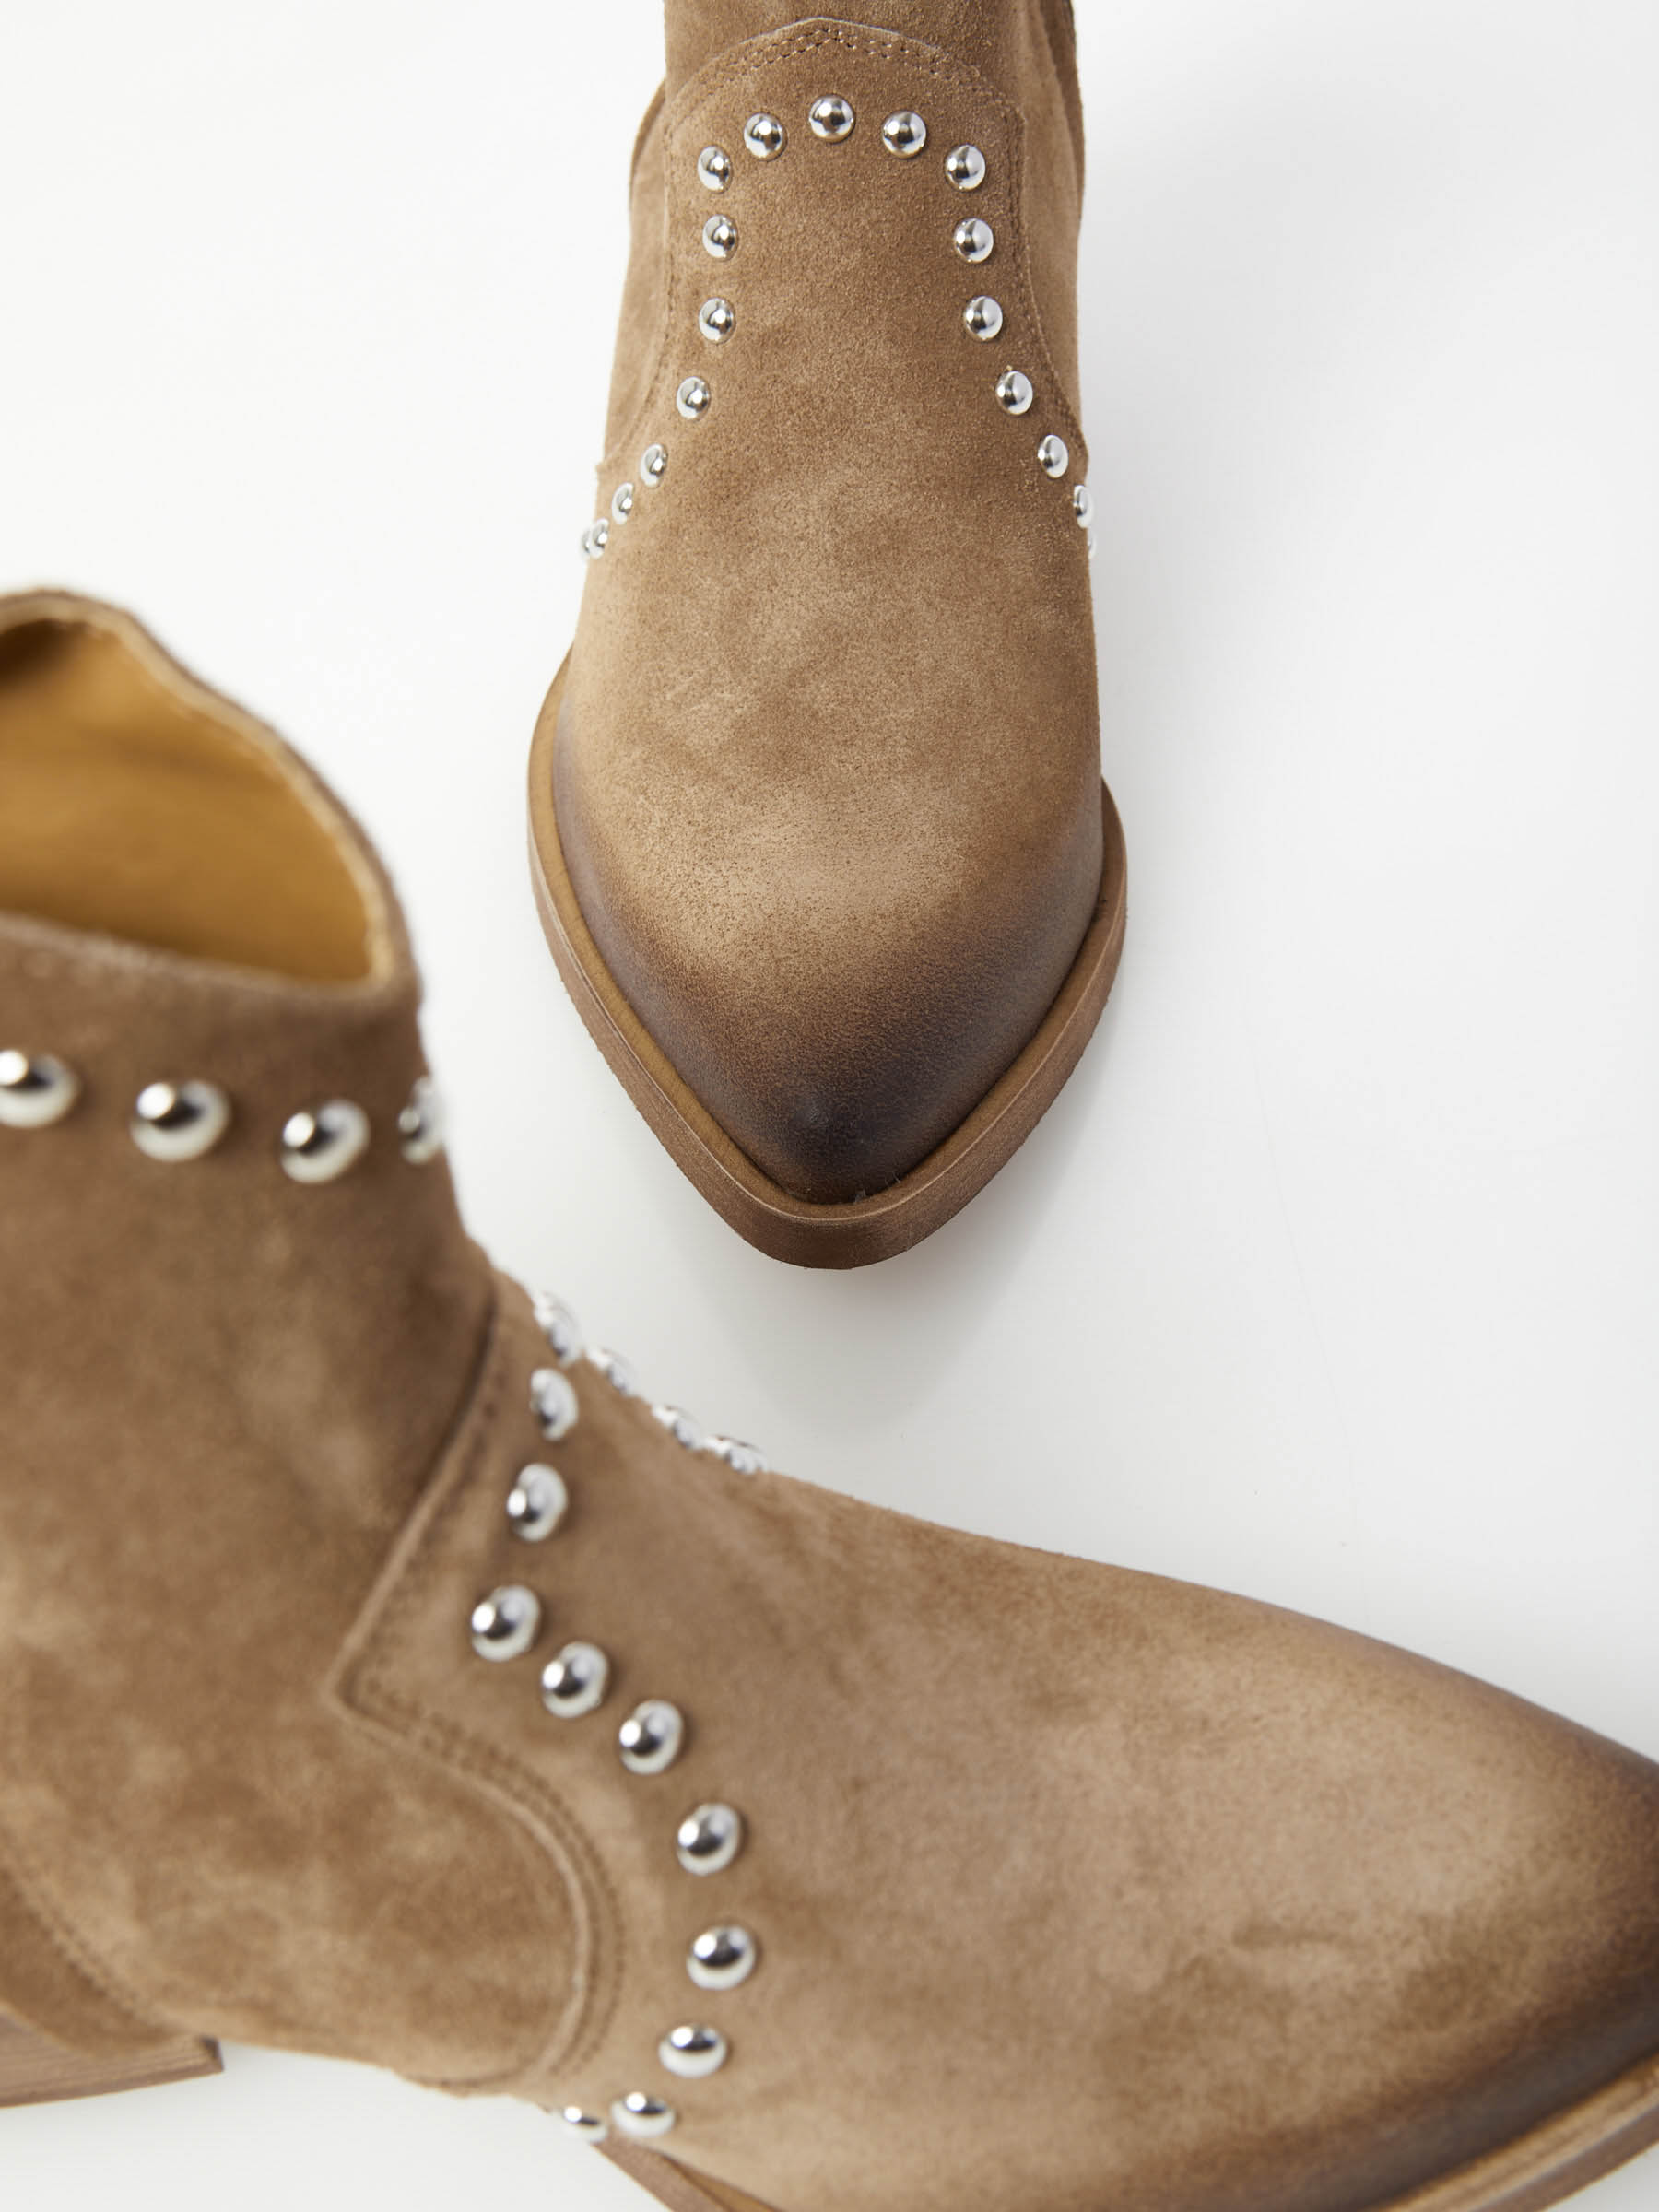 Suede Cowboy Ankle Boot Lucy